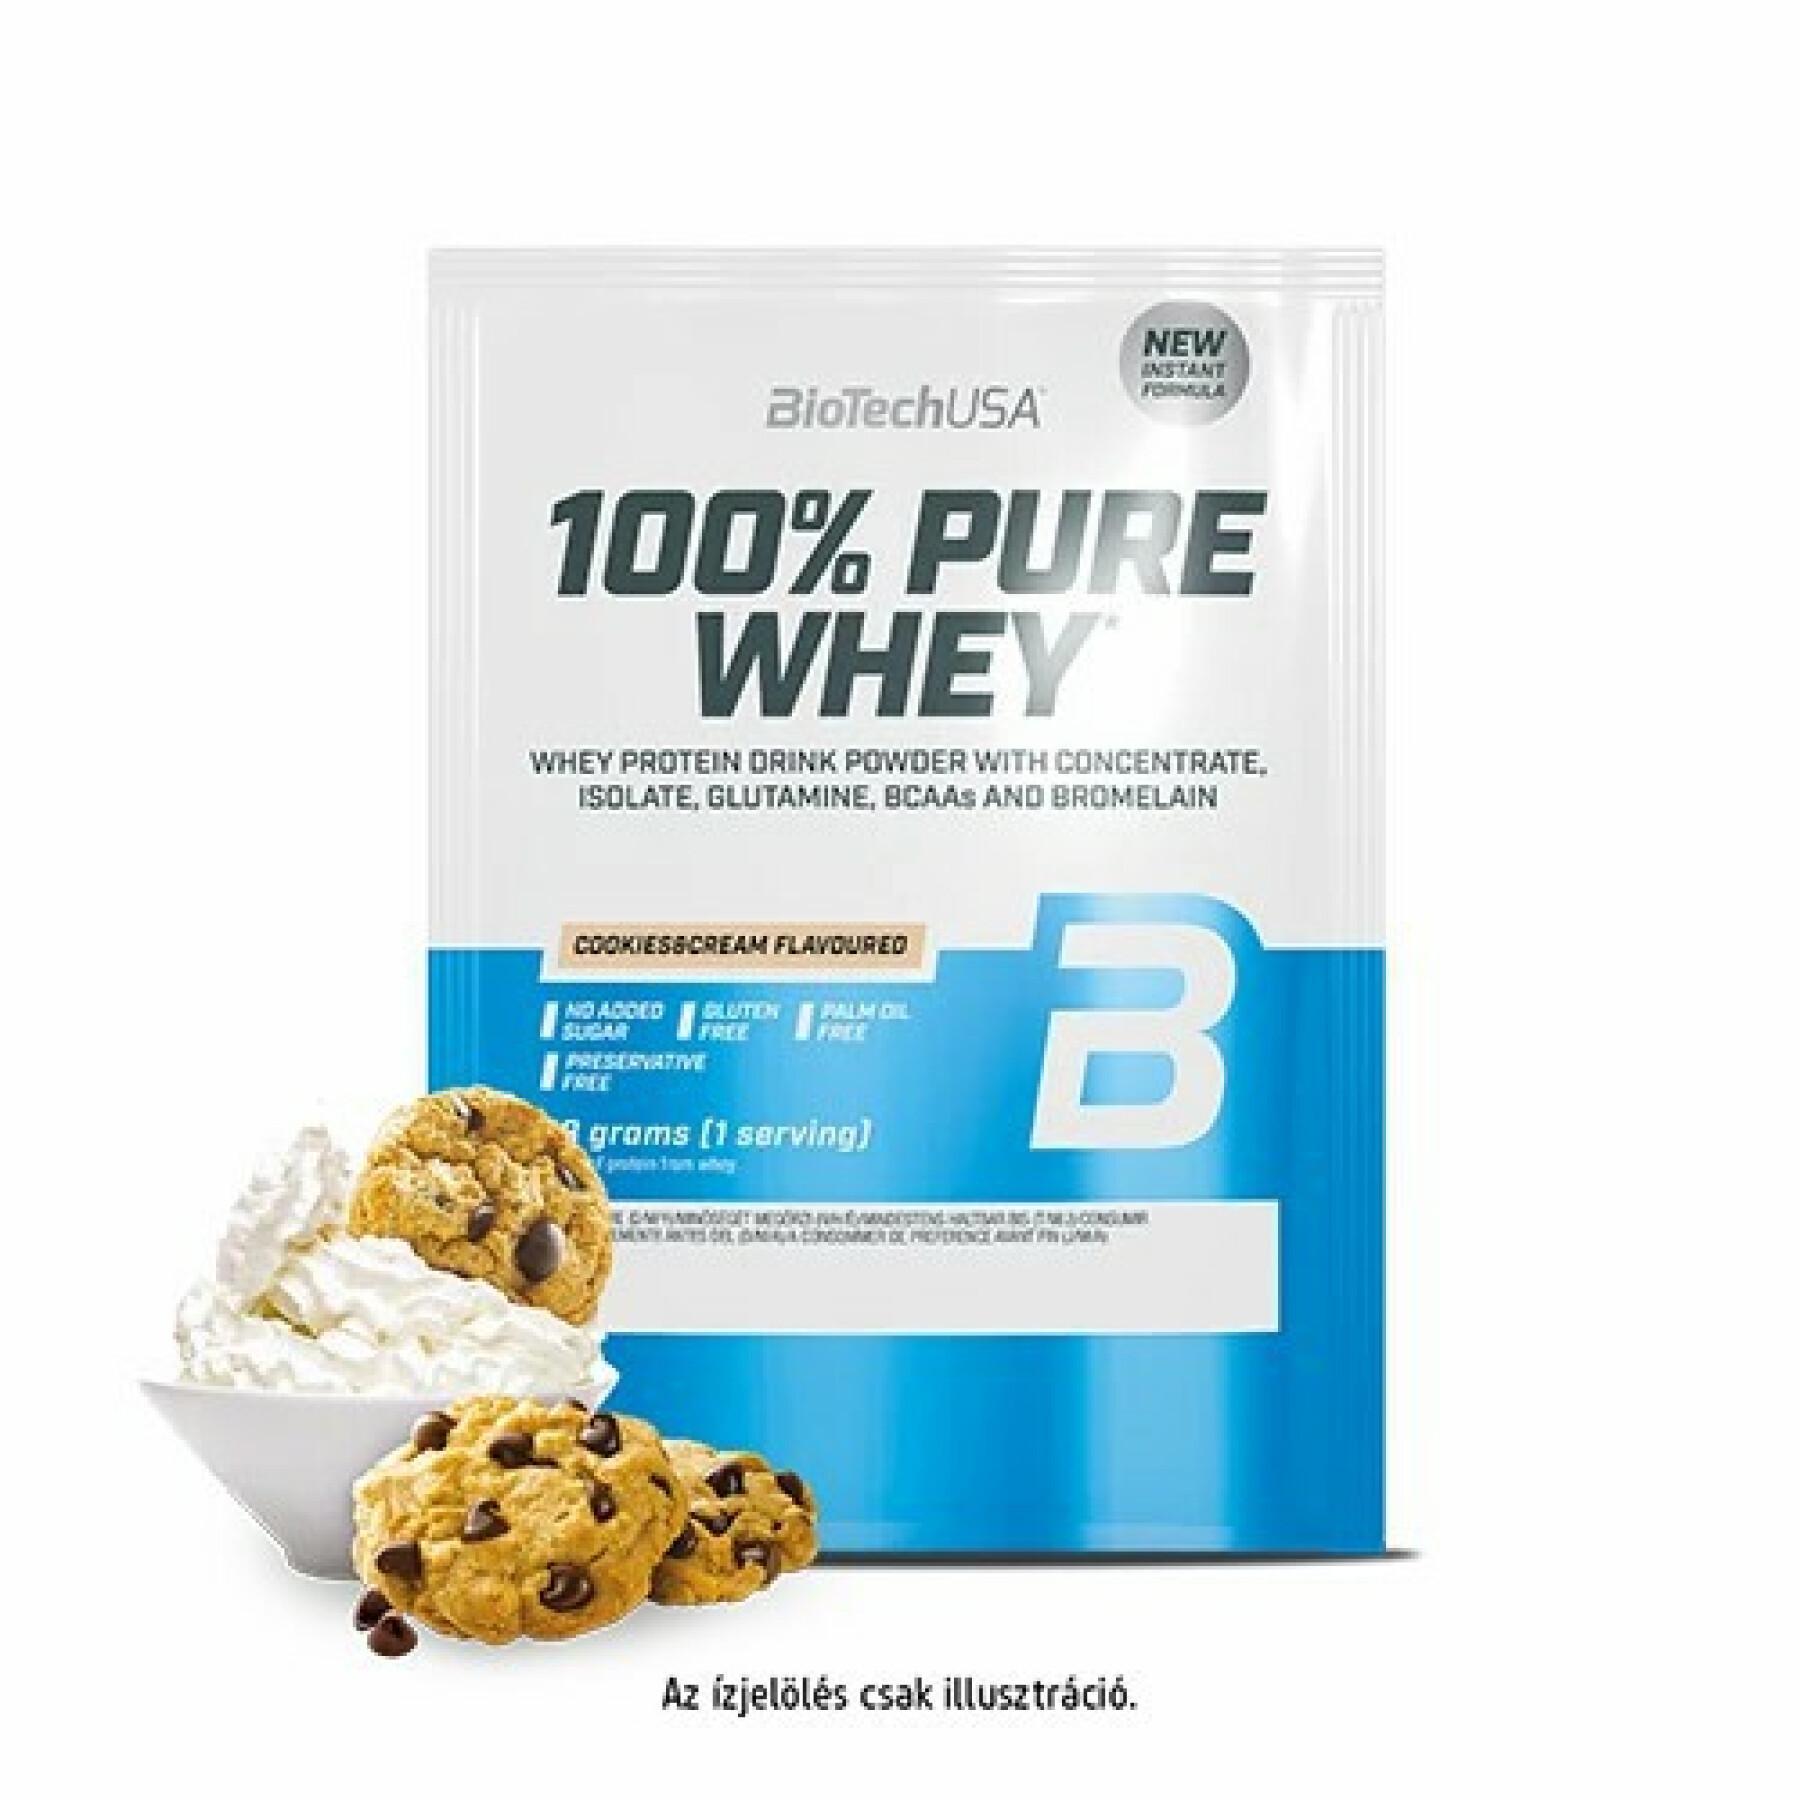 50 packets of 100% pure whey protein Biotech USA - Cookies & cream - 28g